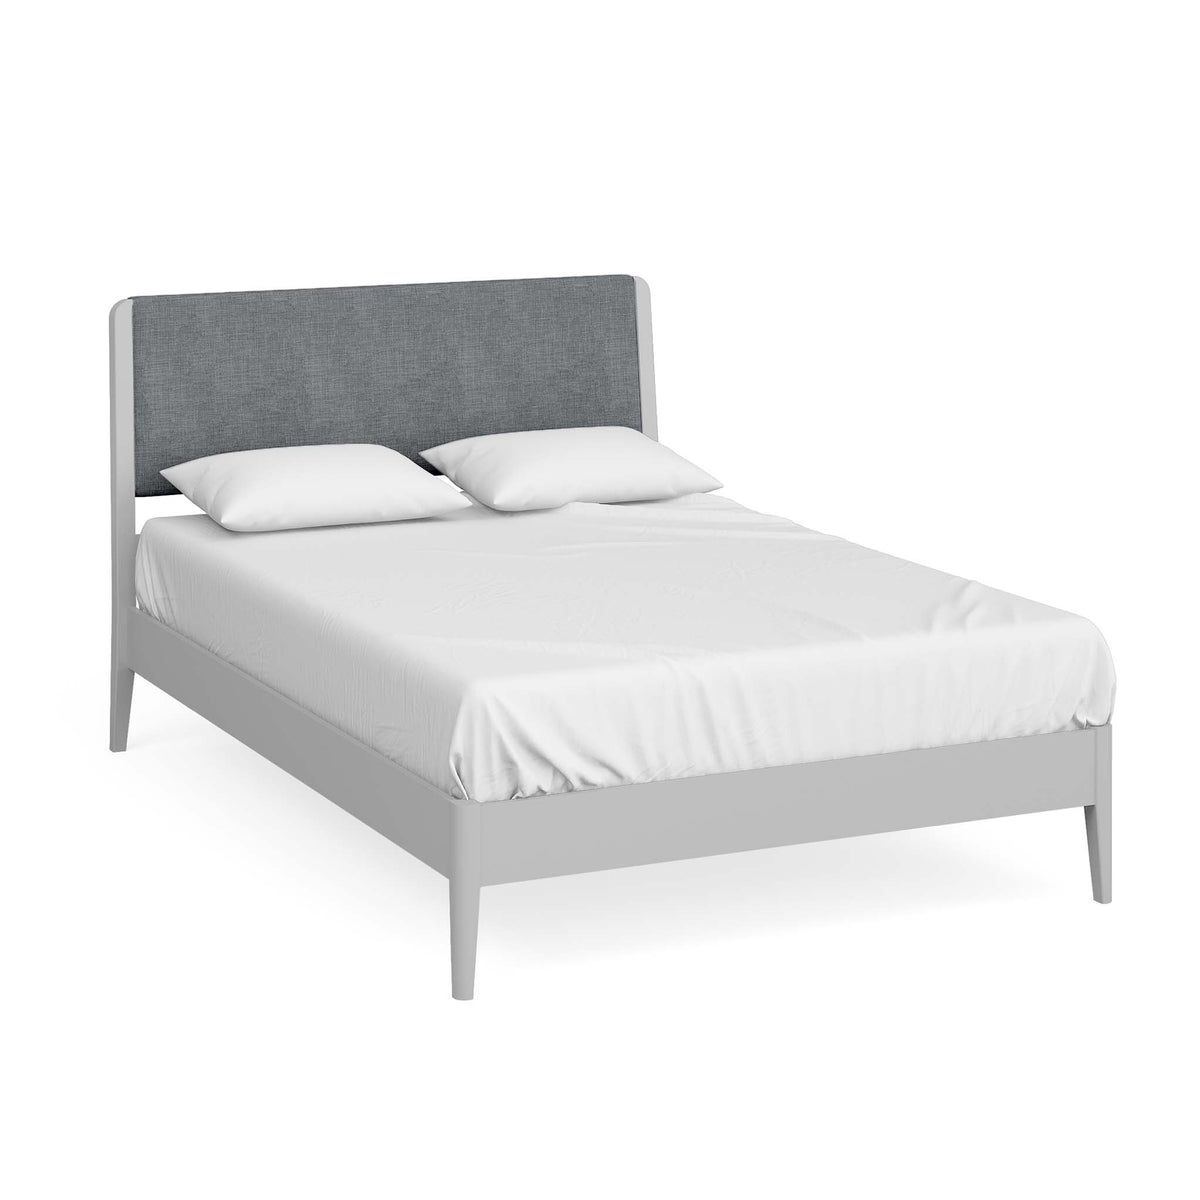 Elgin Grey 4ft6 Double Bed Frame from Roseland Furniture